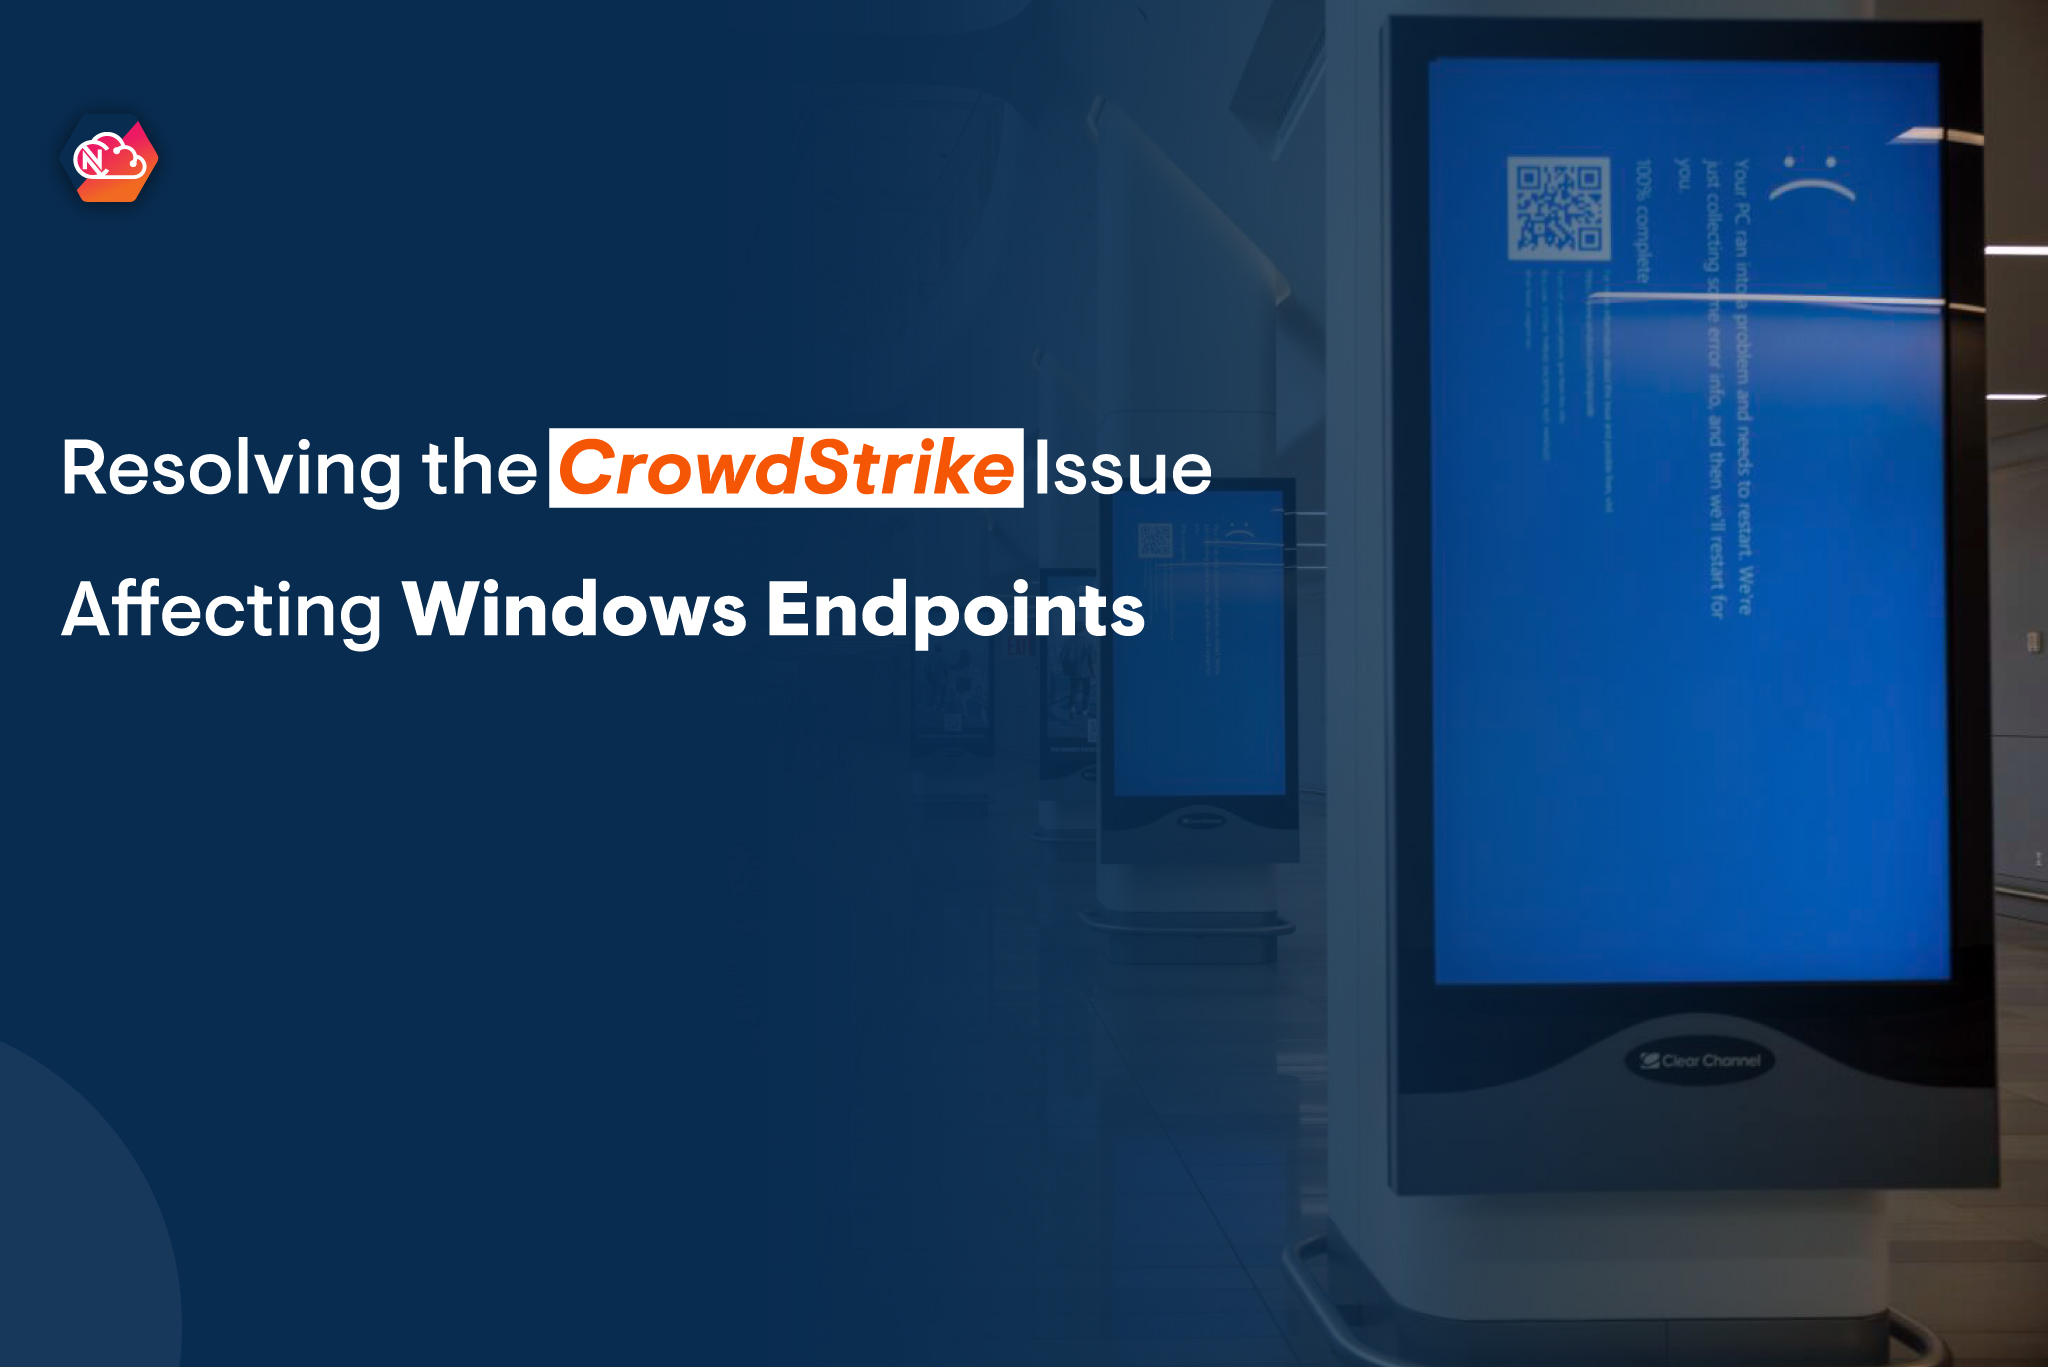 Resolving the CrowdStrike issue affecting Windows Endpoints